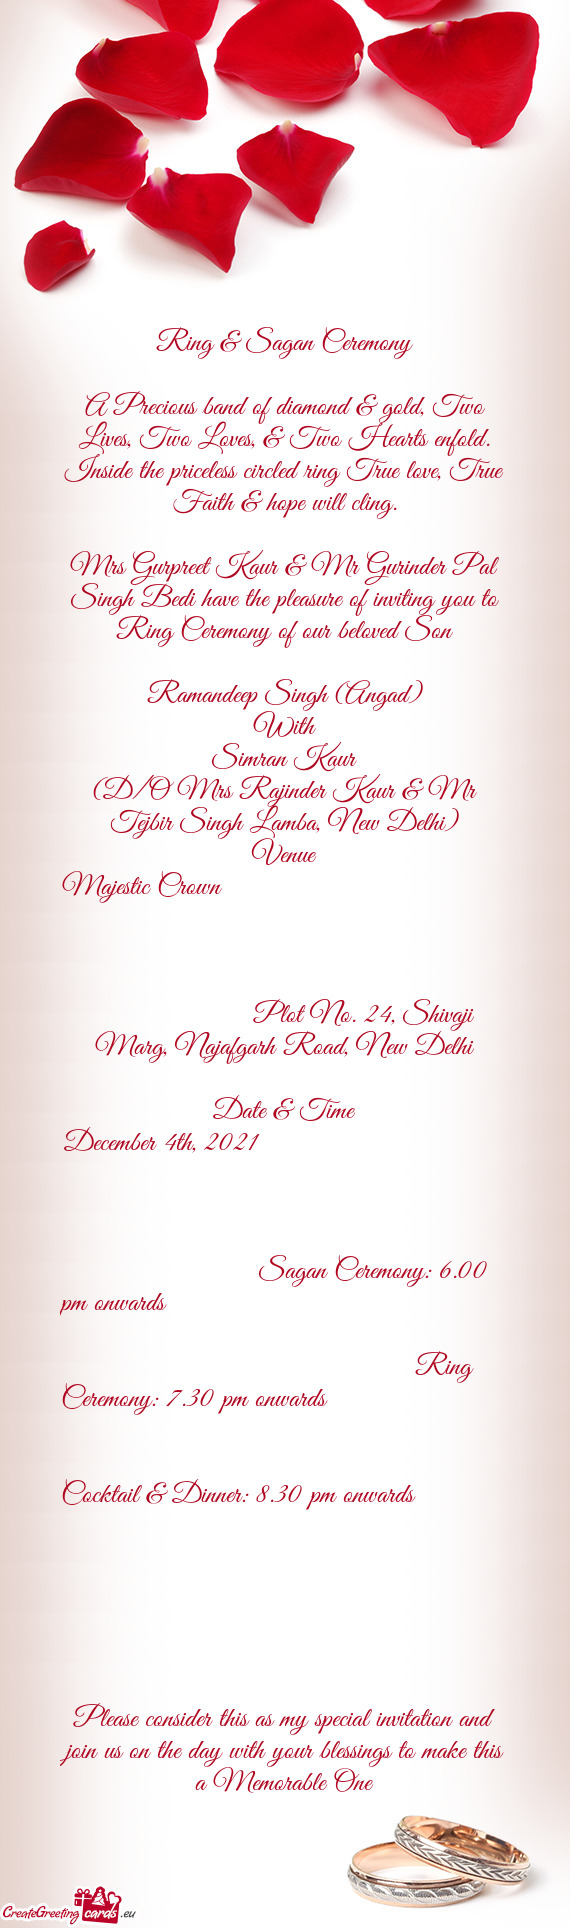 Mrs Gurpreet Kaur & Mr Gurinder Pal Singh Bedi have the pleasure of inviting you to Ring Ceremony of